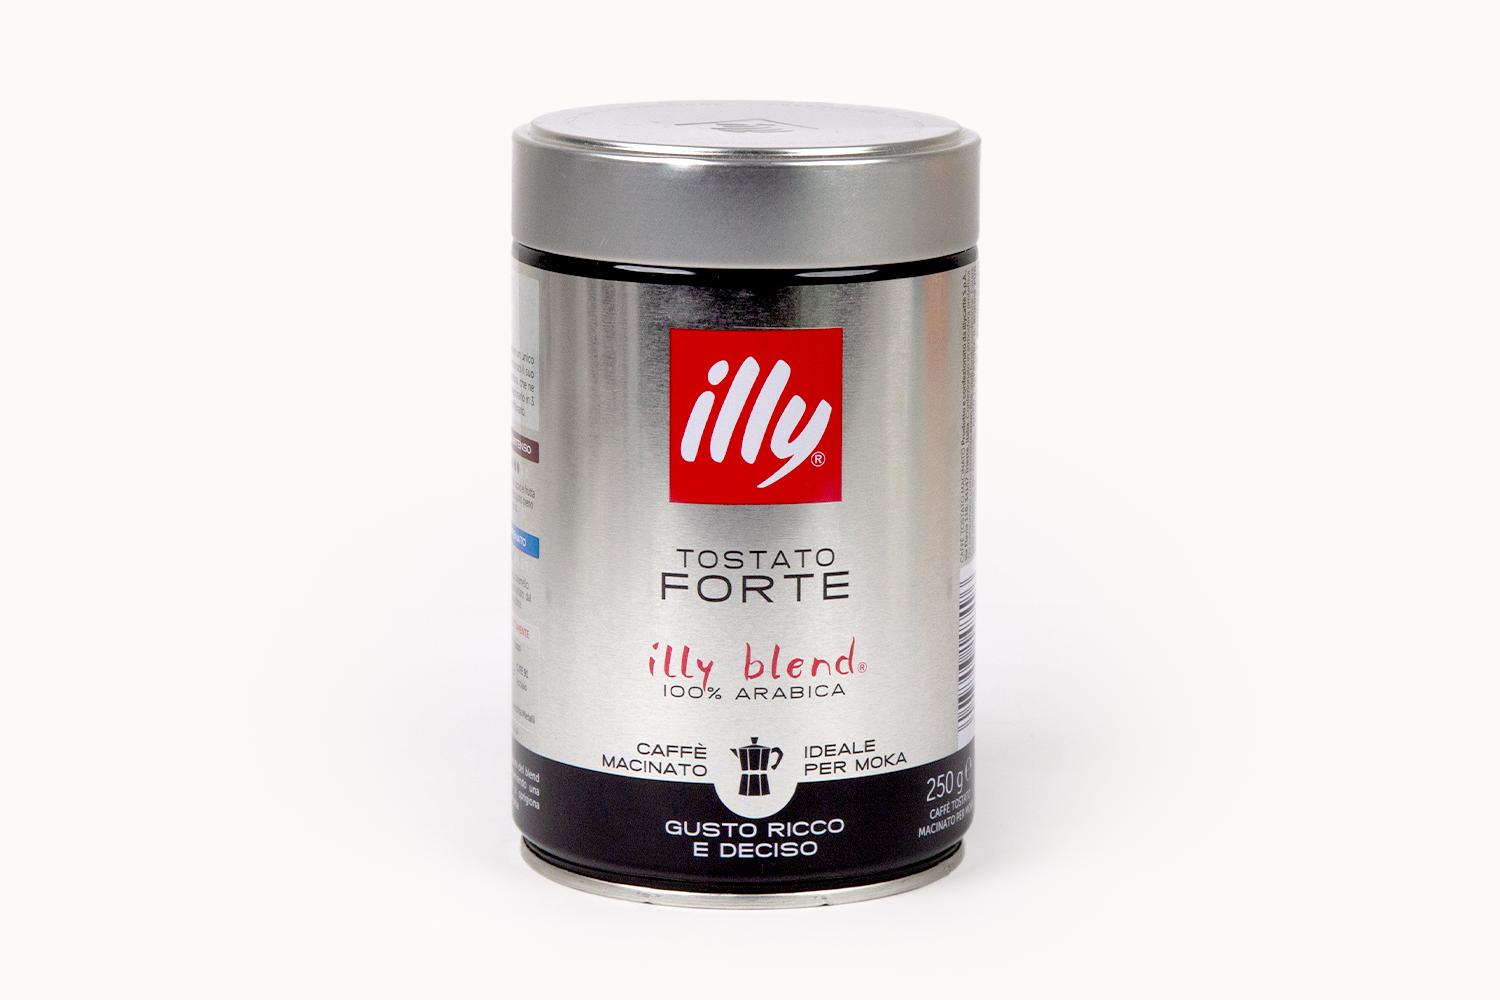 Illy Tostato Forte Instant Coffee